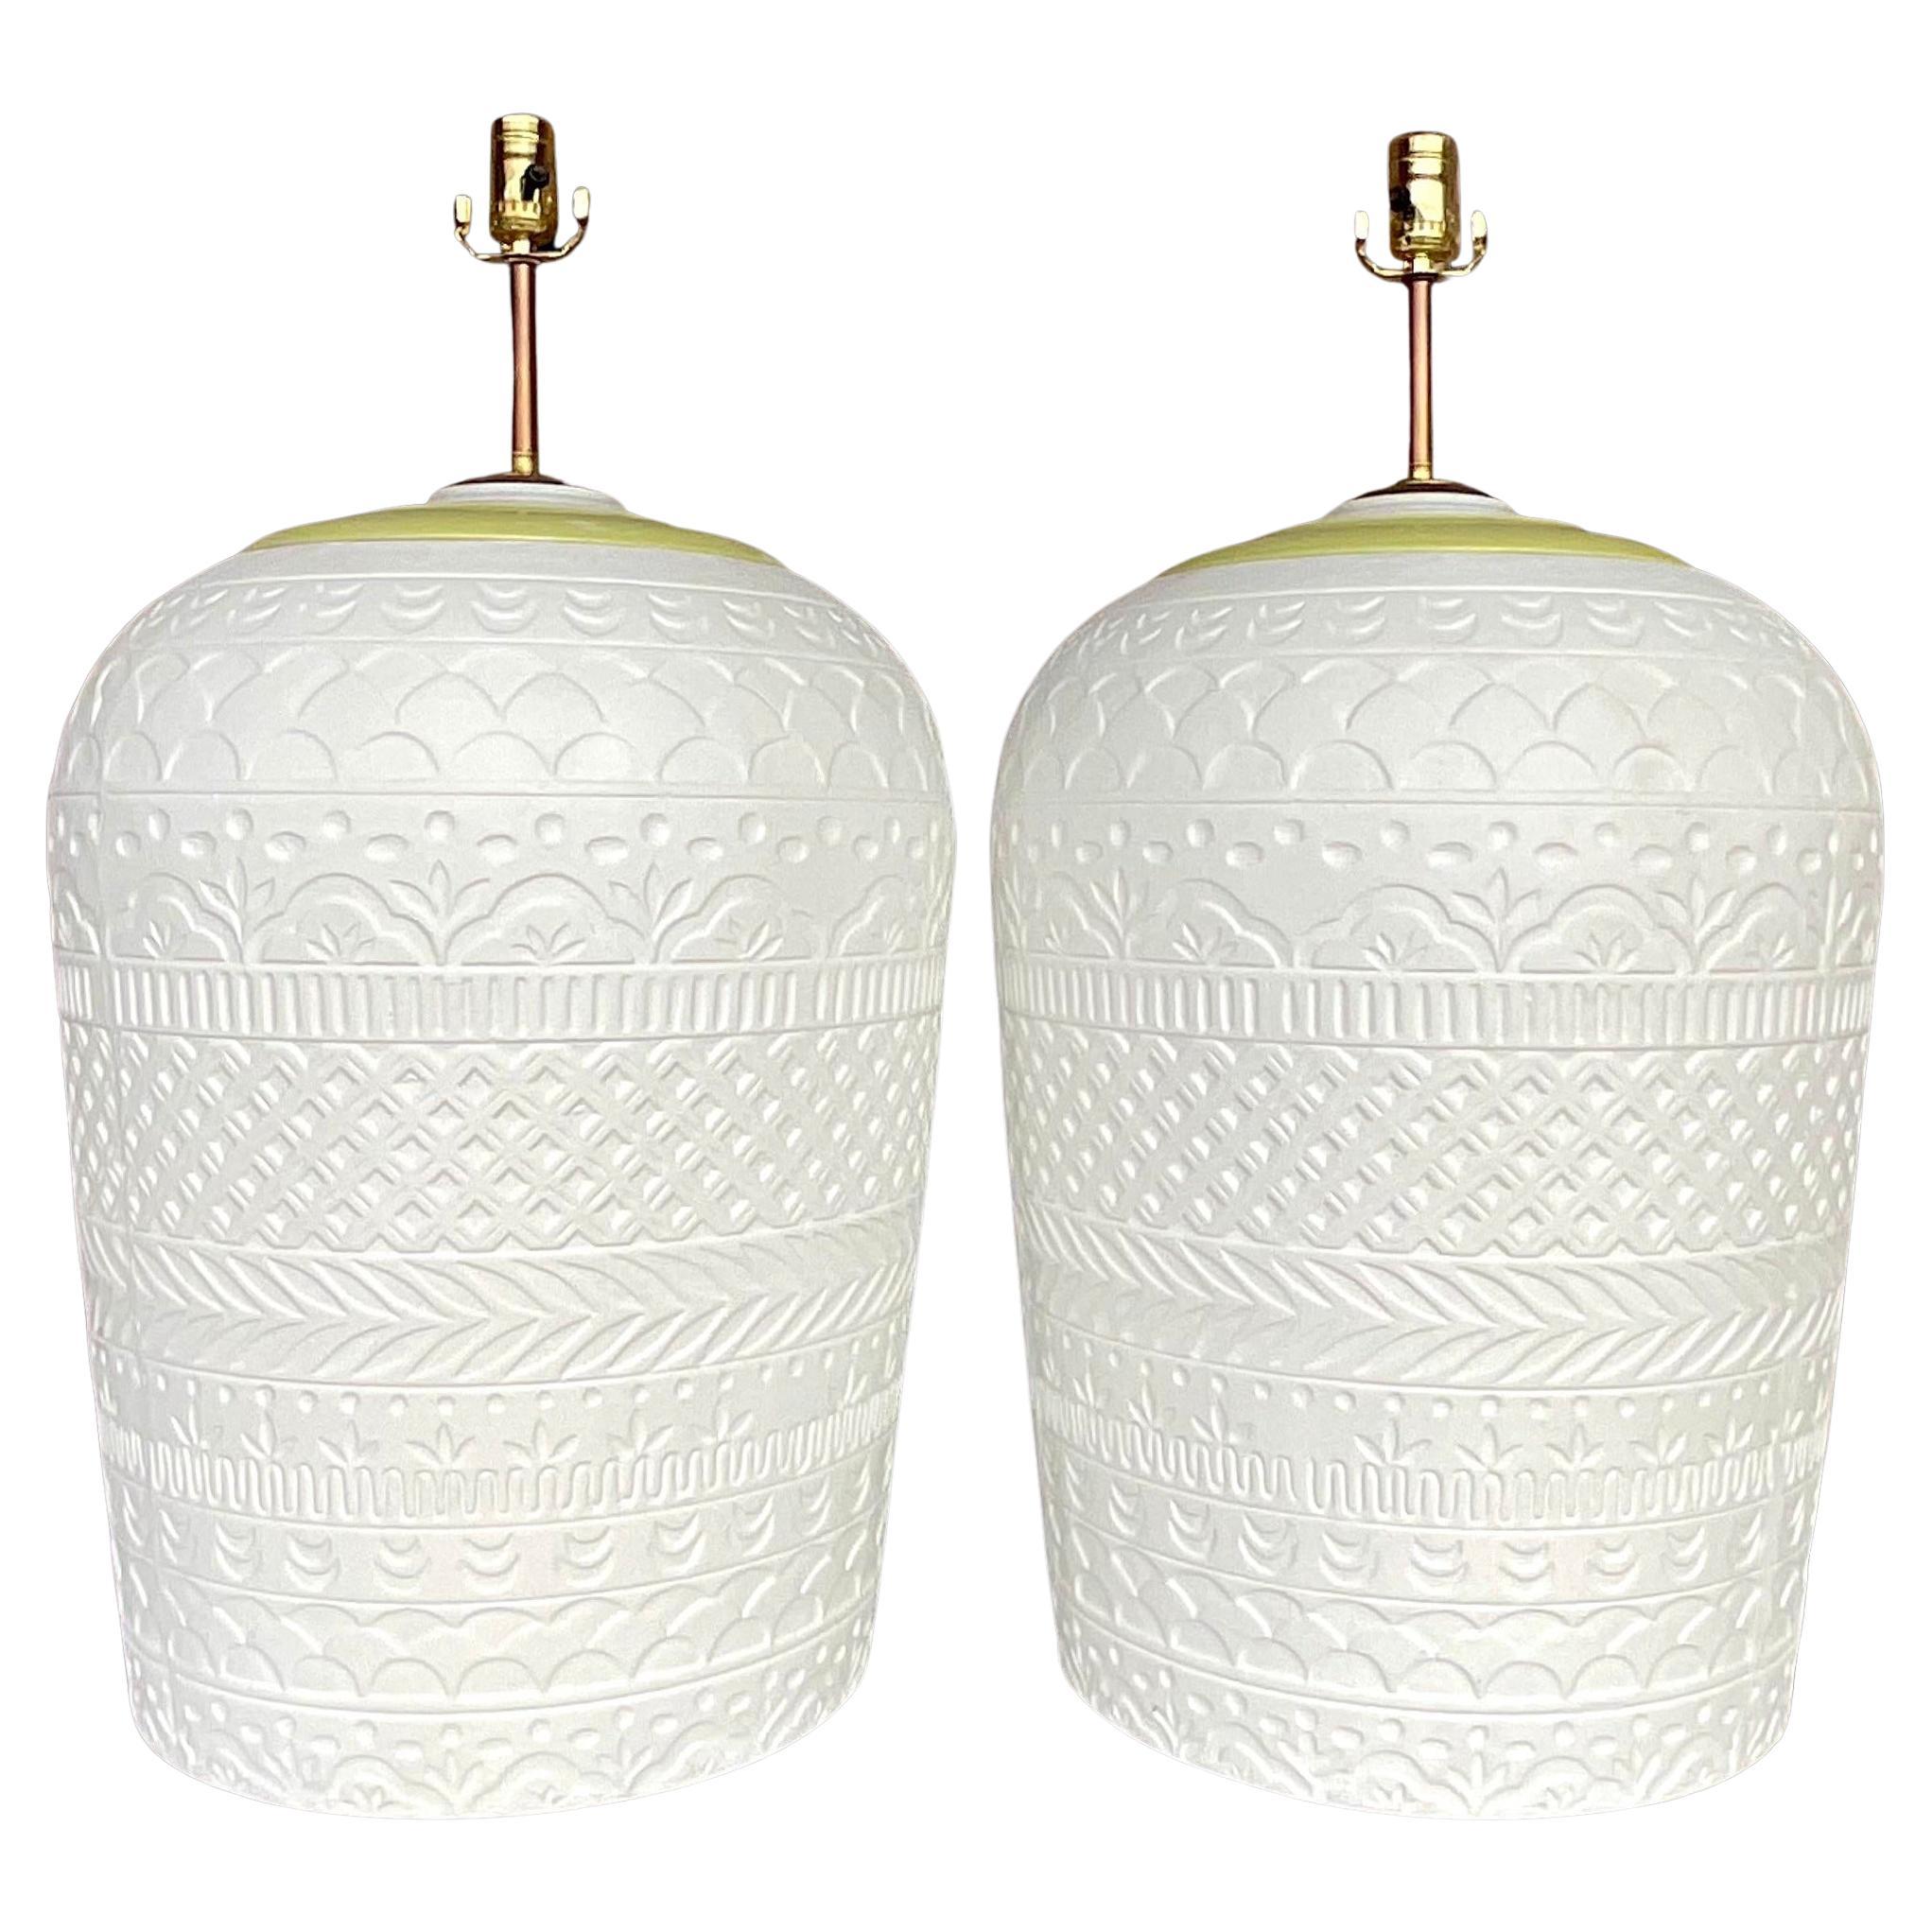 Vintage Boho Monumental Plaster Relief Lamps - a Pair For Sale